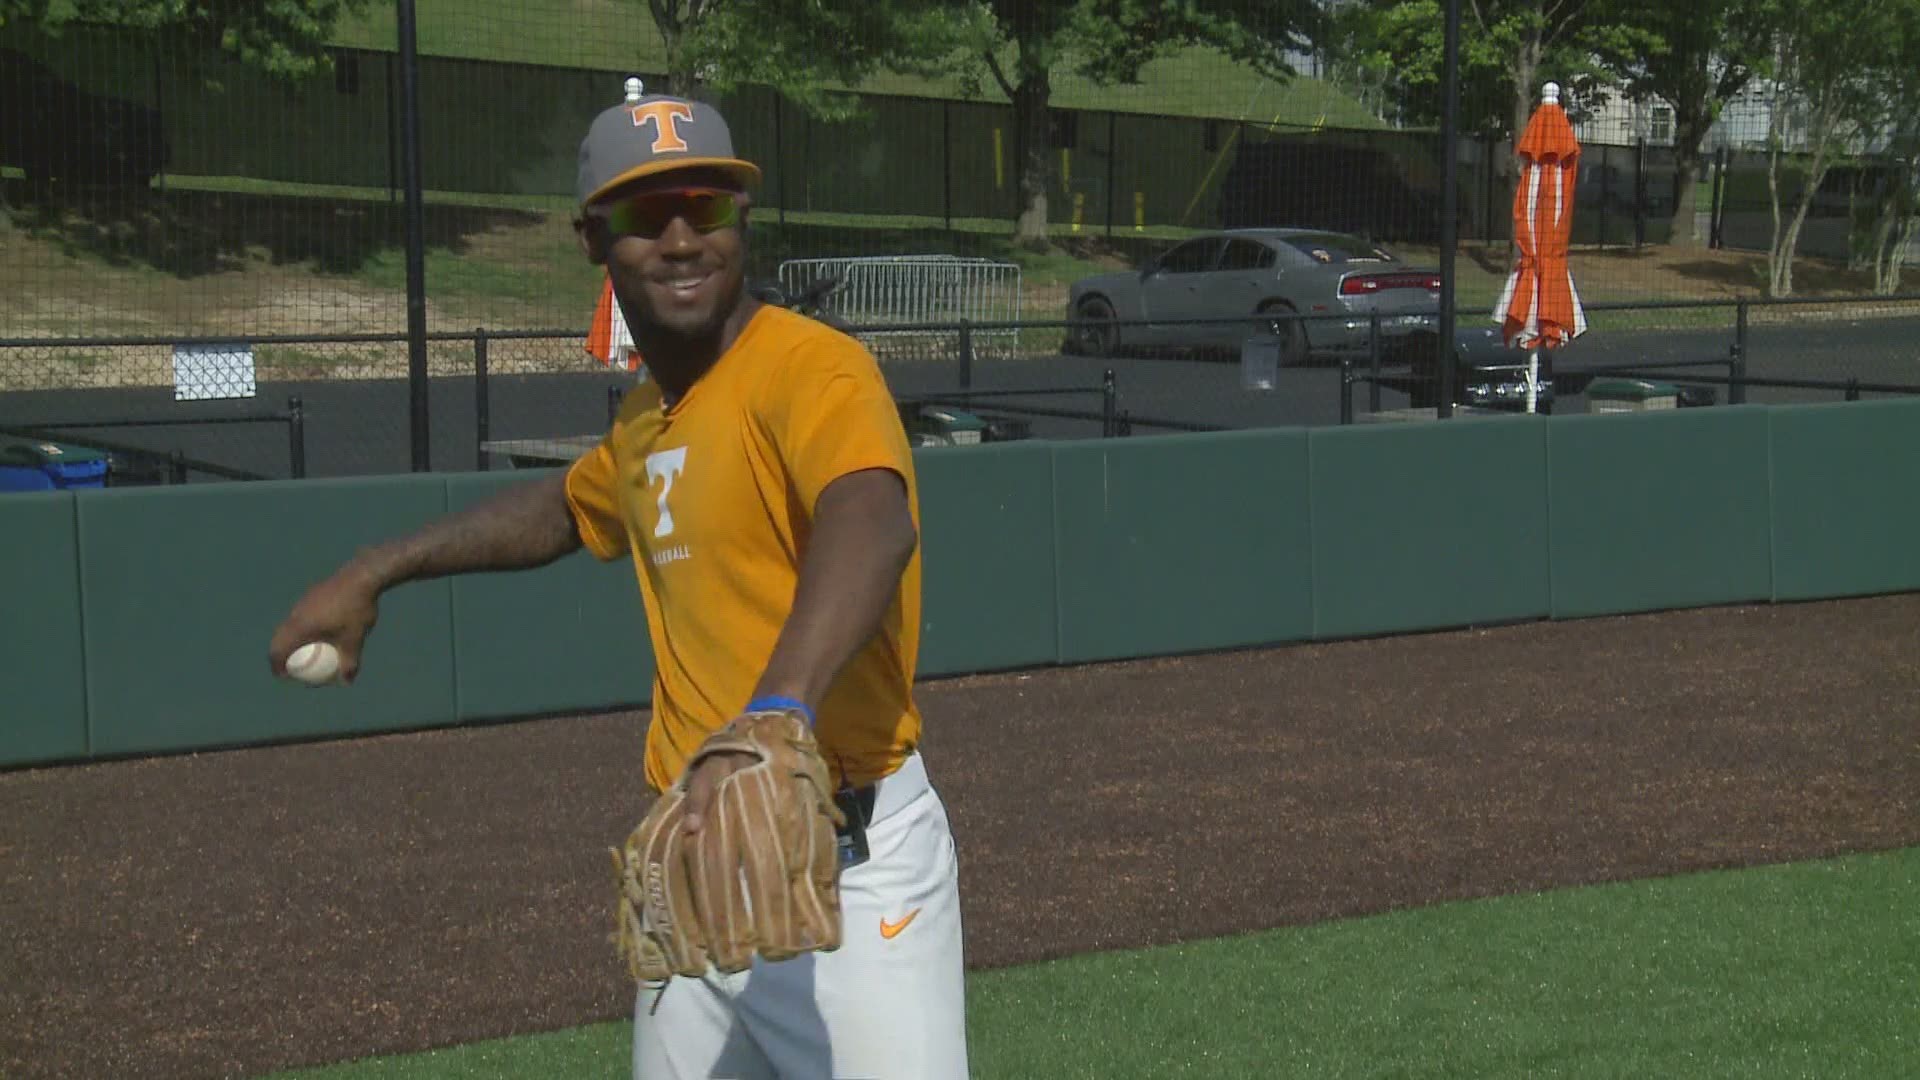 The full interview with Tennessee outfielder Alerick Soularie. He leads the Vols with a .369 batting average.